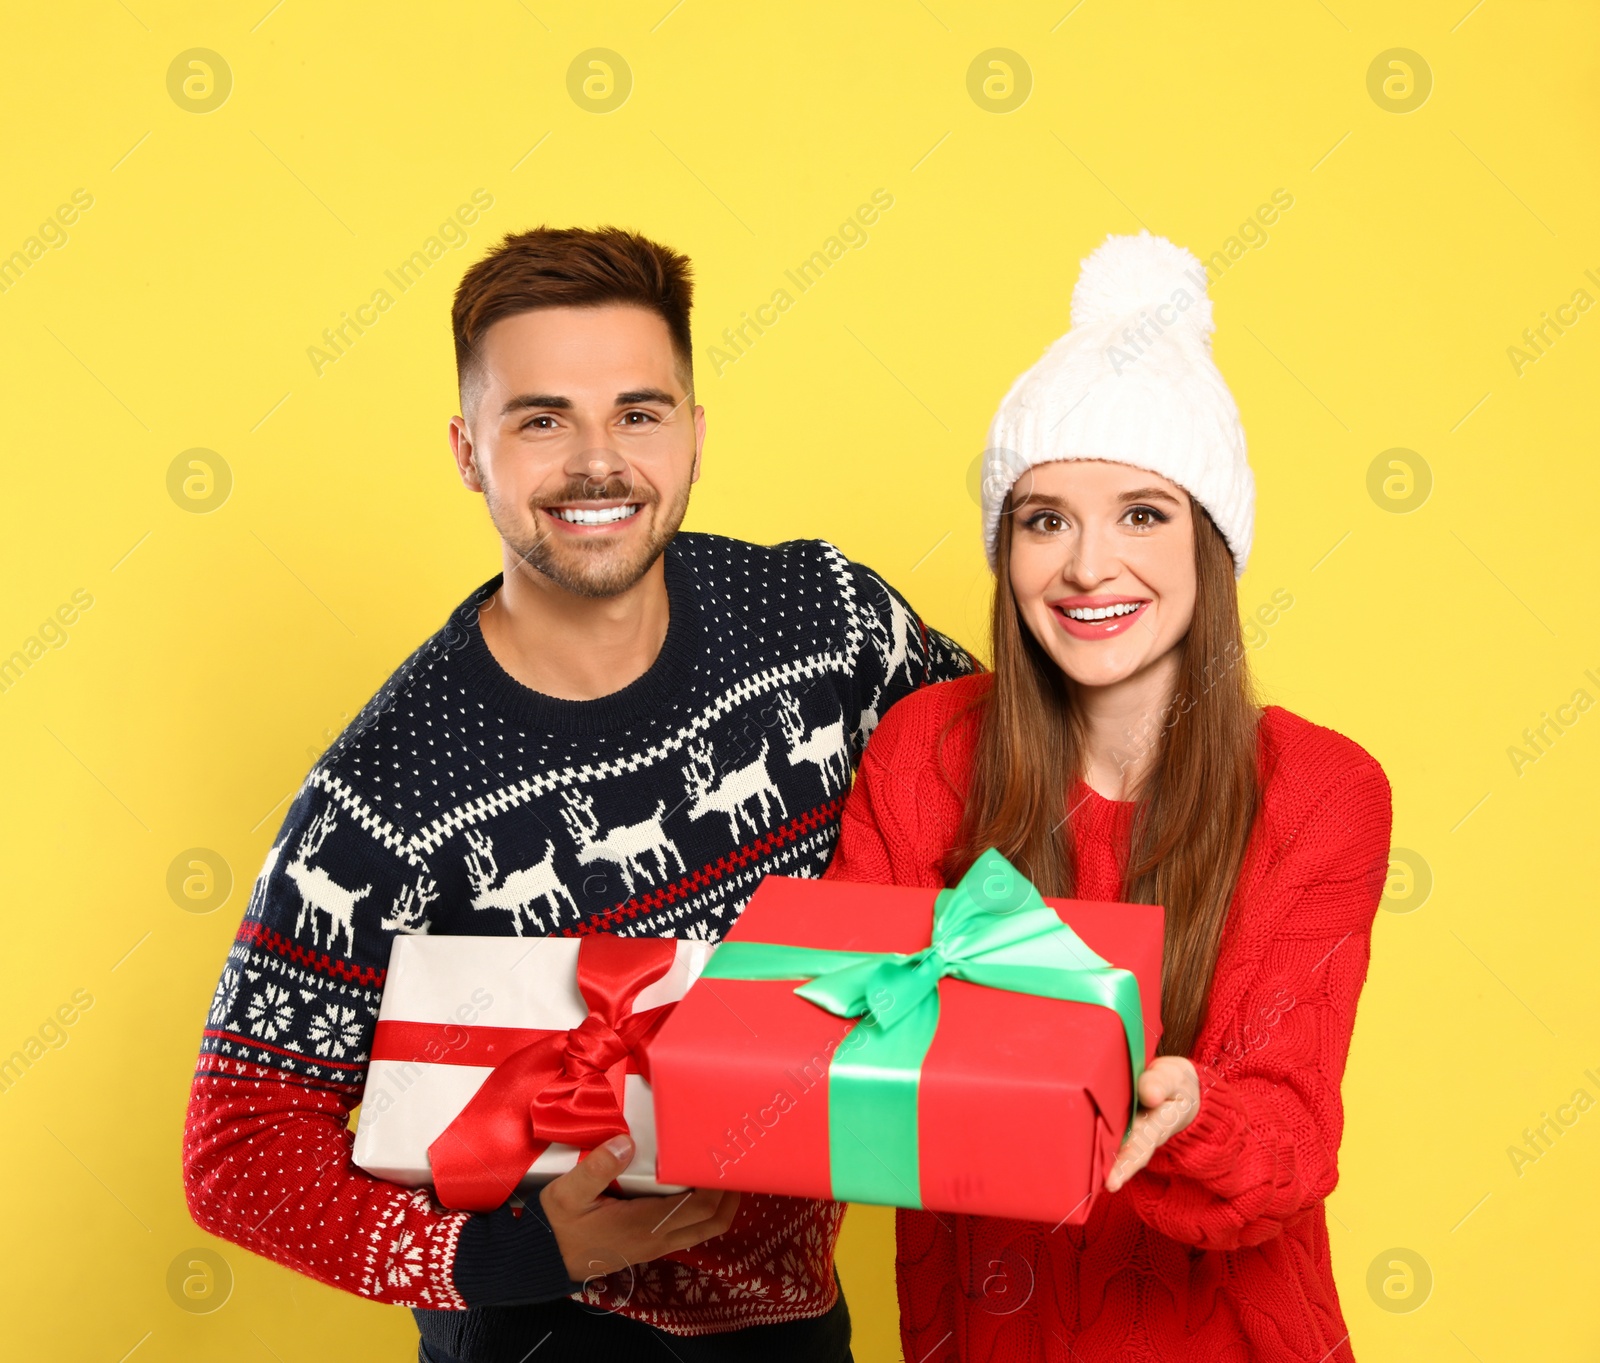 Photo of Couple in Christmas sweaters with gift boxes on yellow background